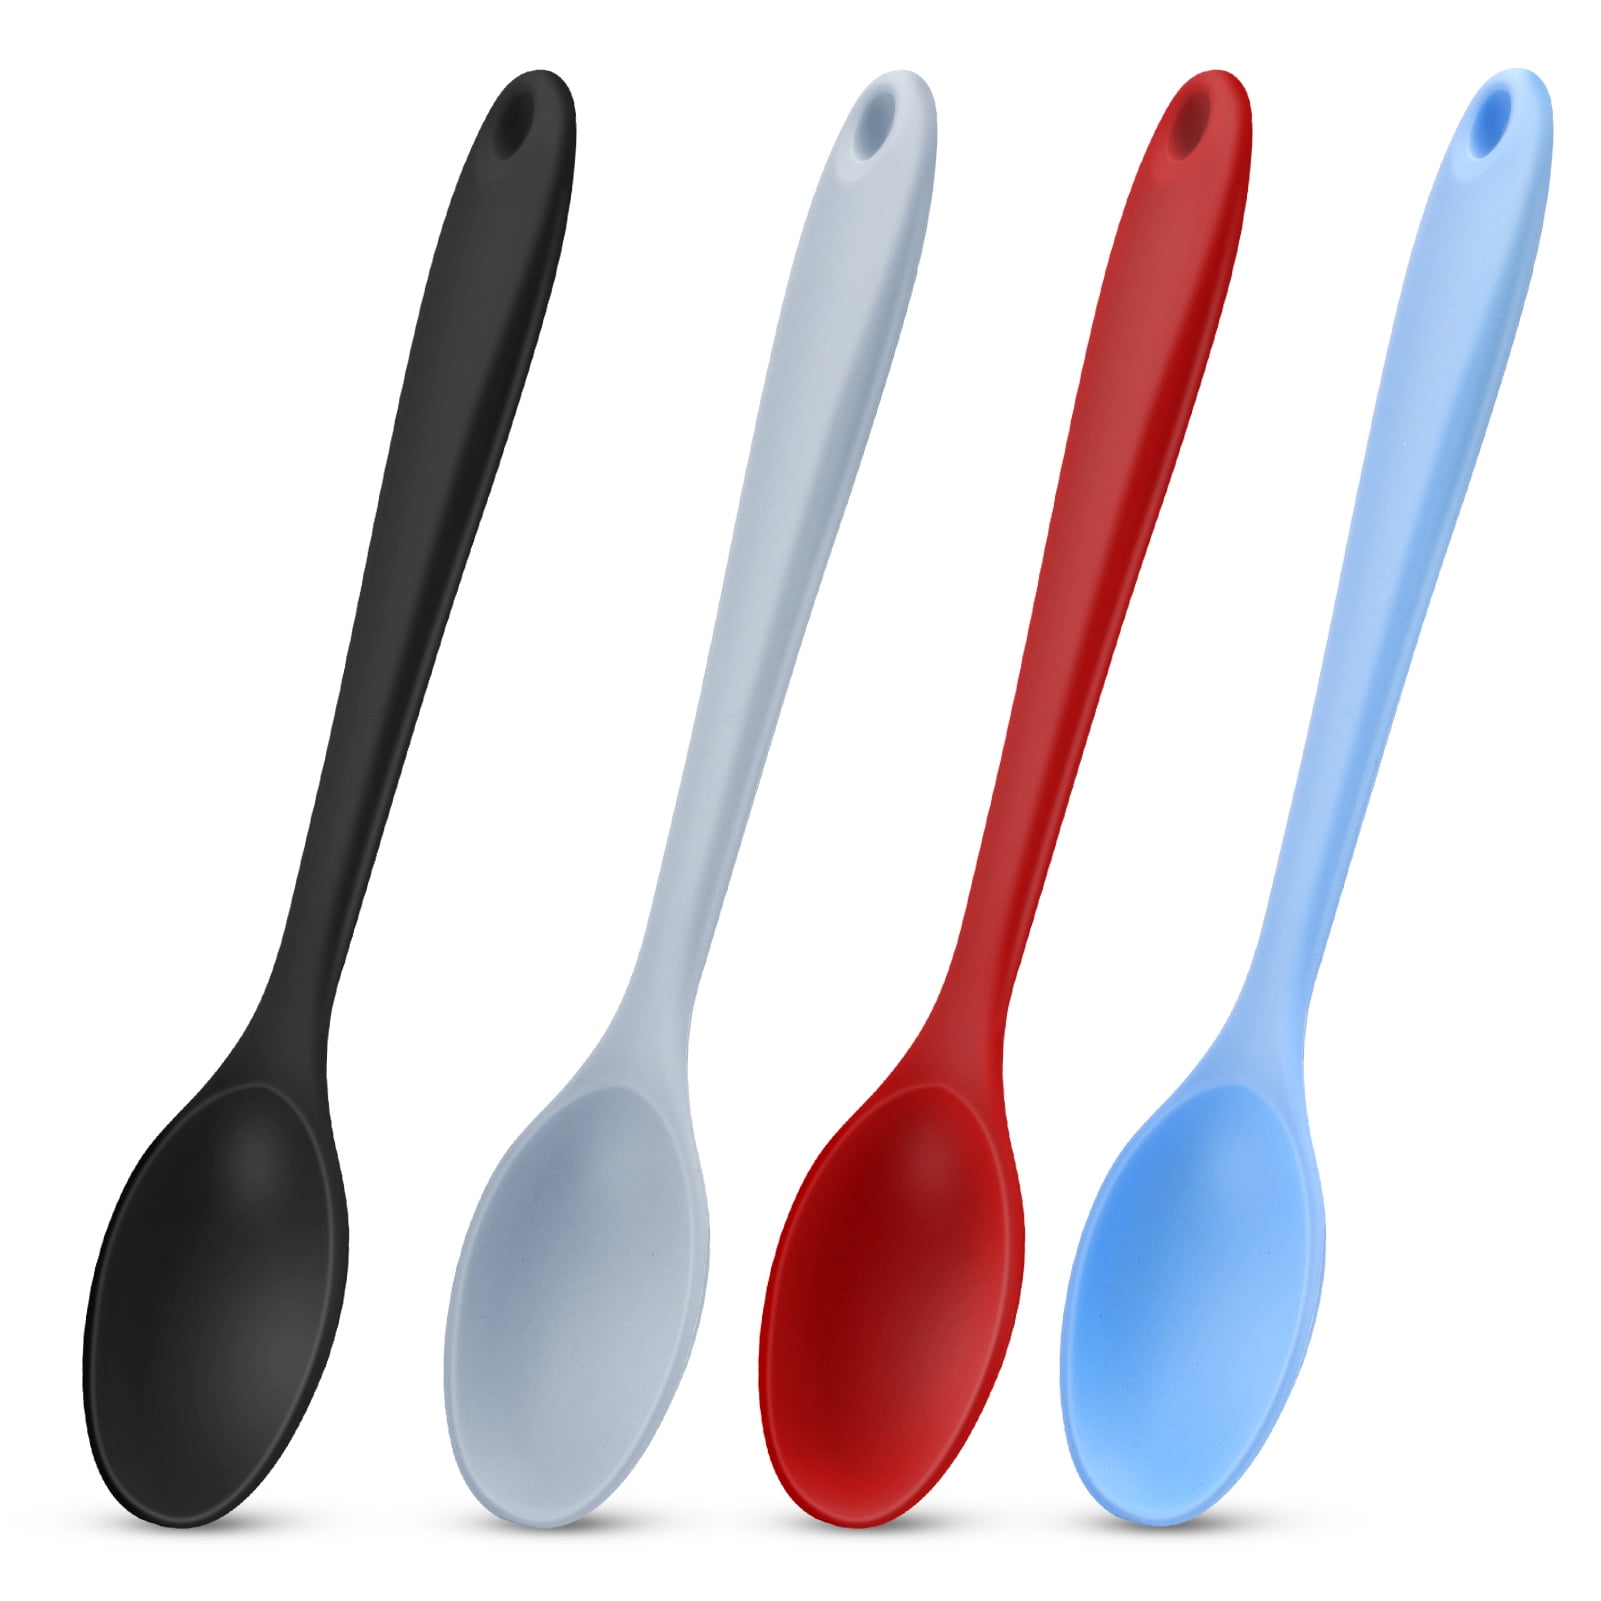 Jmk Iit 8 PC Silicone Mixing Spoon Utensil Serving Cooking Heat Resistant Kitchen Tools